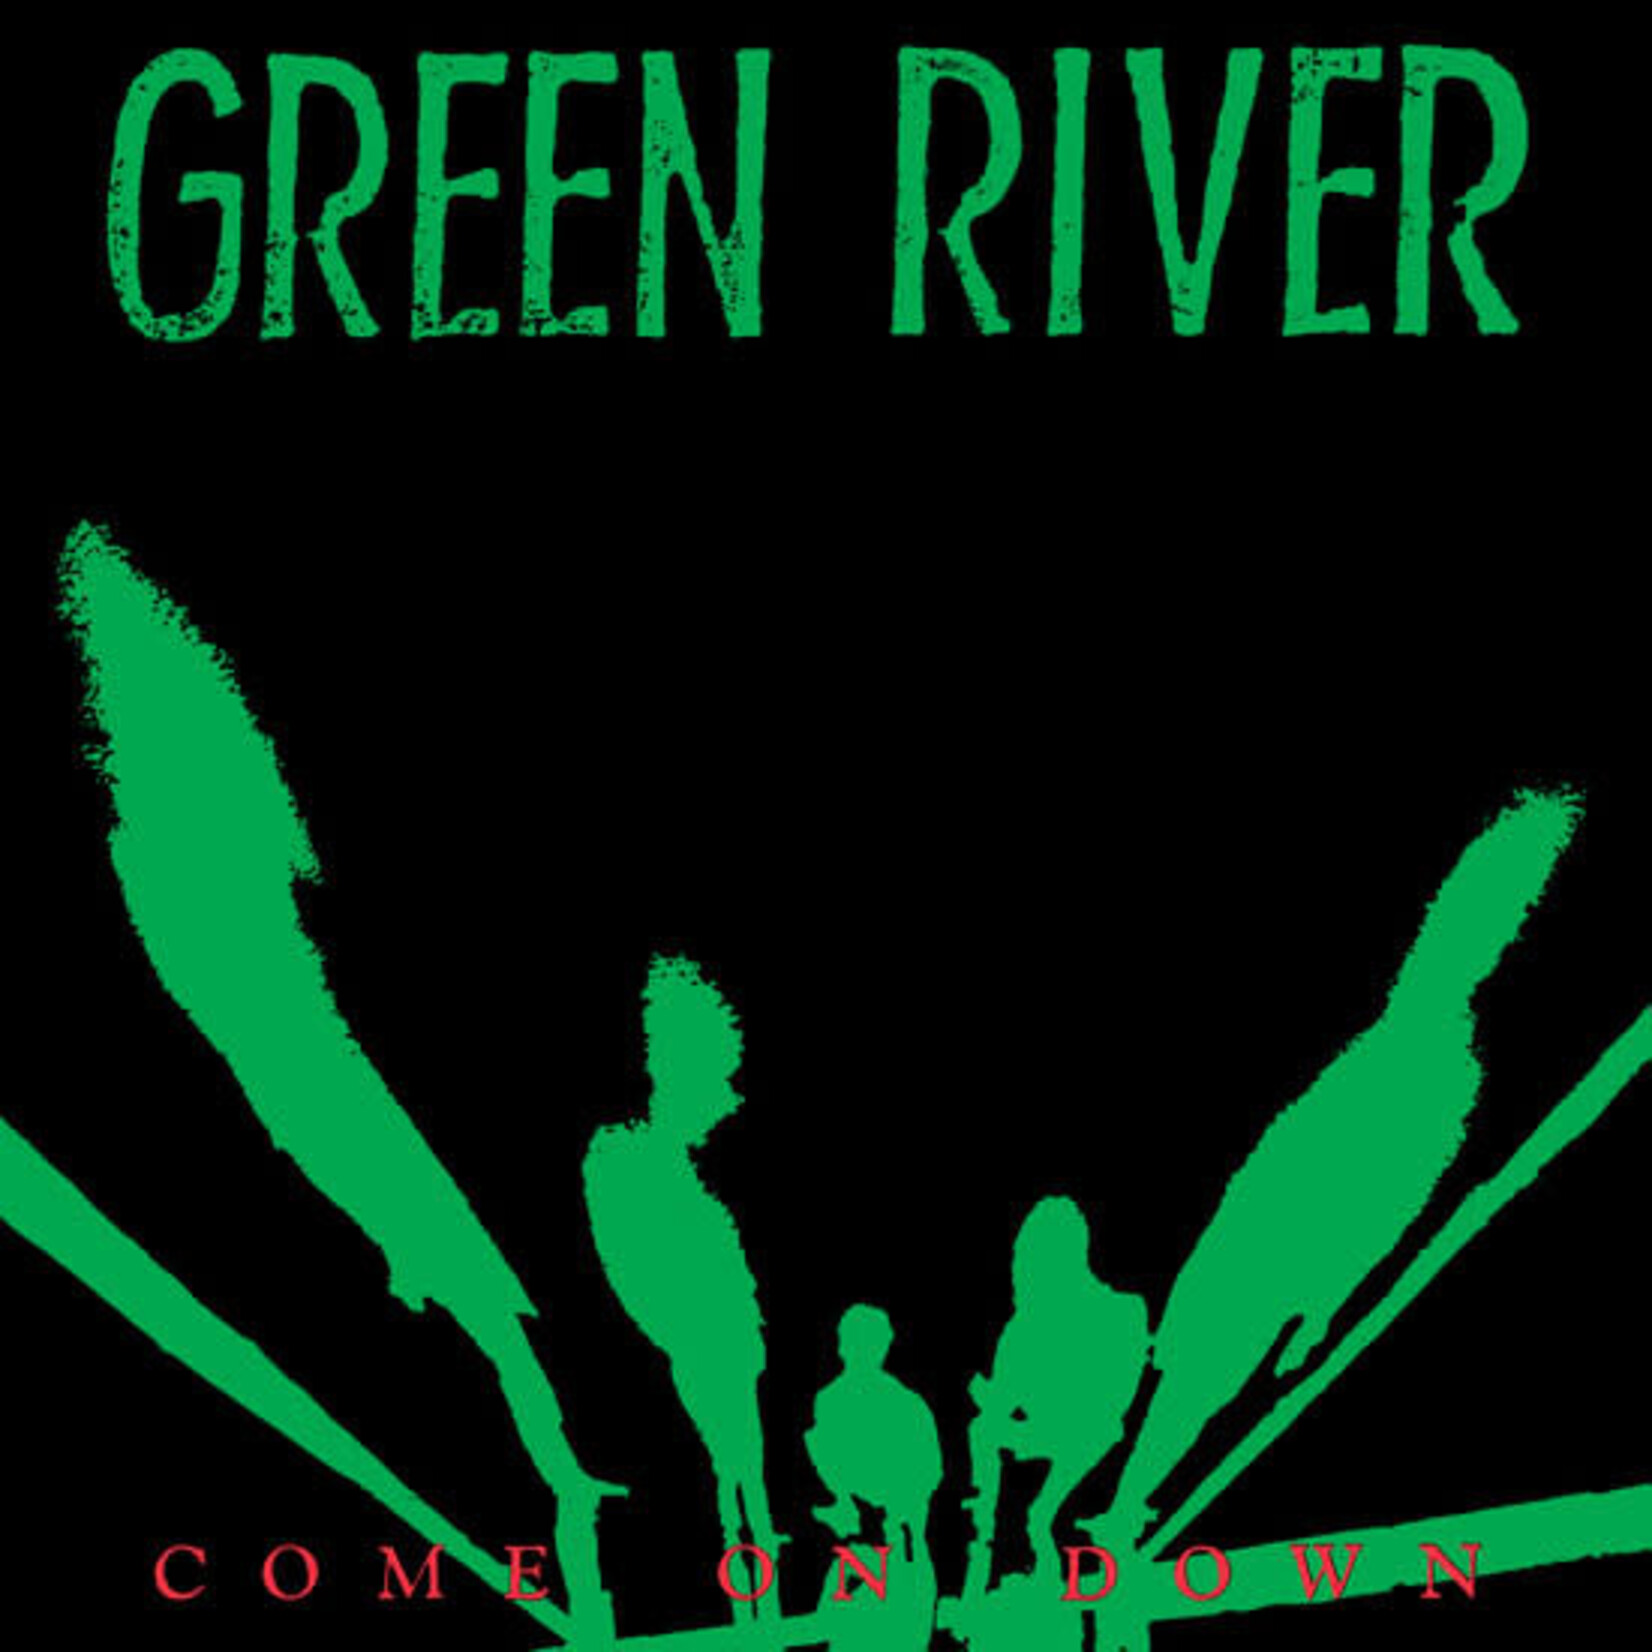 [New] Green River: Come On Down [JACKPOT]